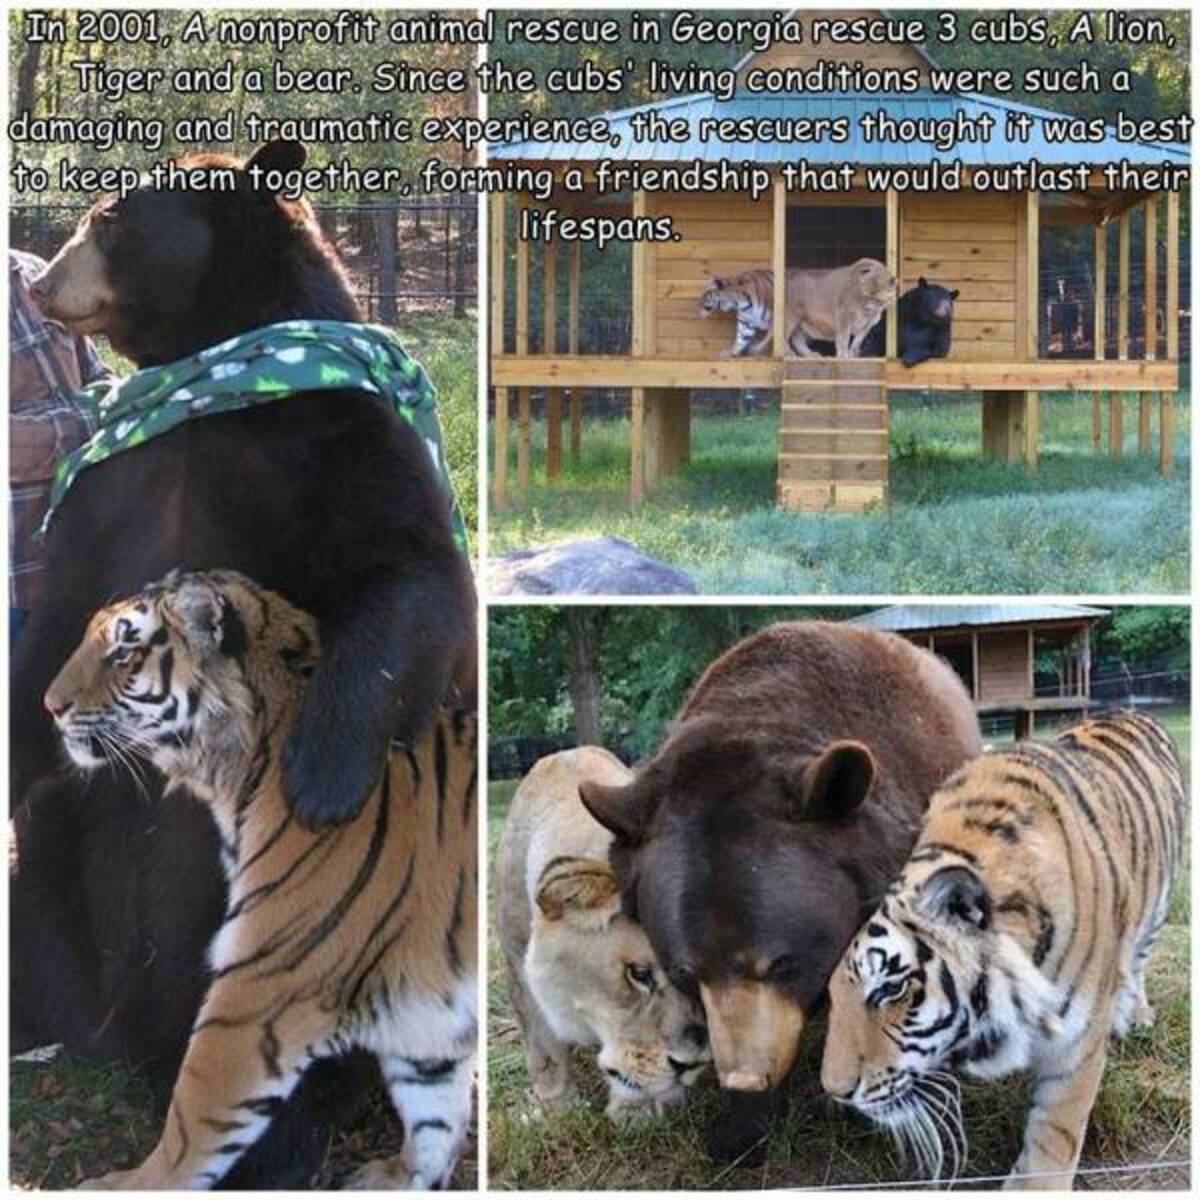 3 different animals together - In 2001, A nonprofit animal rescue in Georgia rescue 3 cubs, A lion, Tiger and a bear. Since the cubs living conditions were such a damaging and traumatic experience, the rescuers thought it was best to keep them together, f